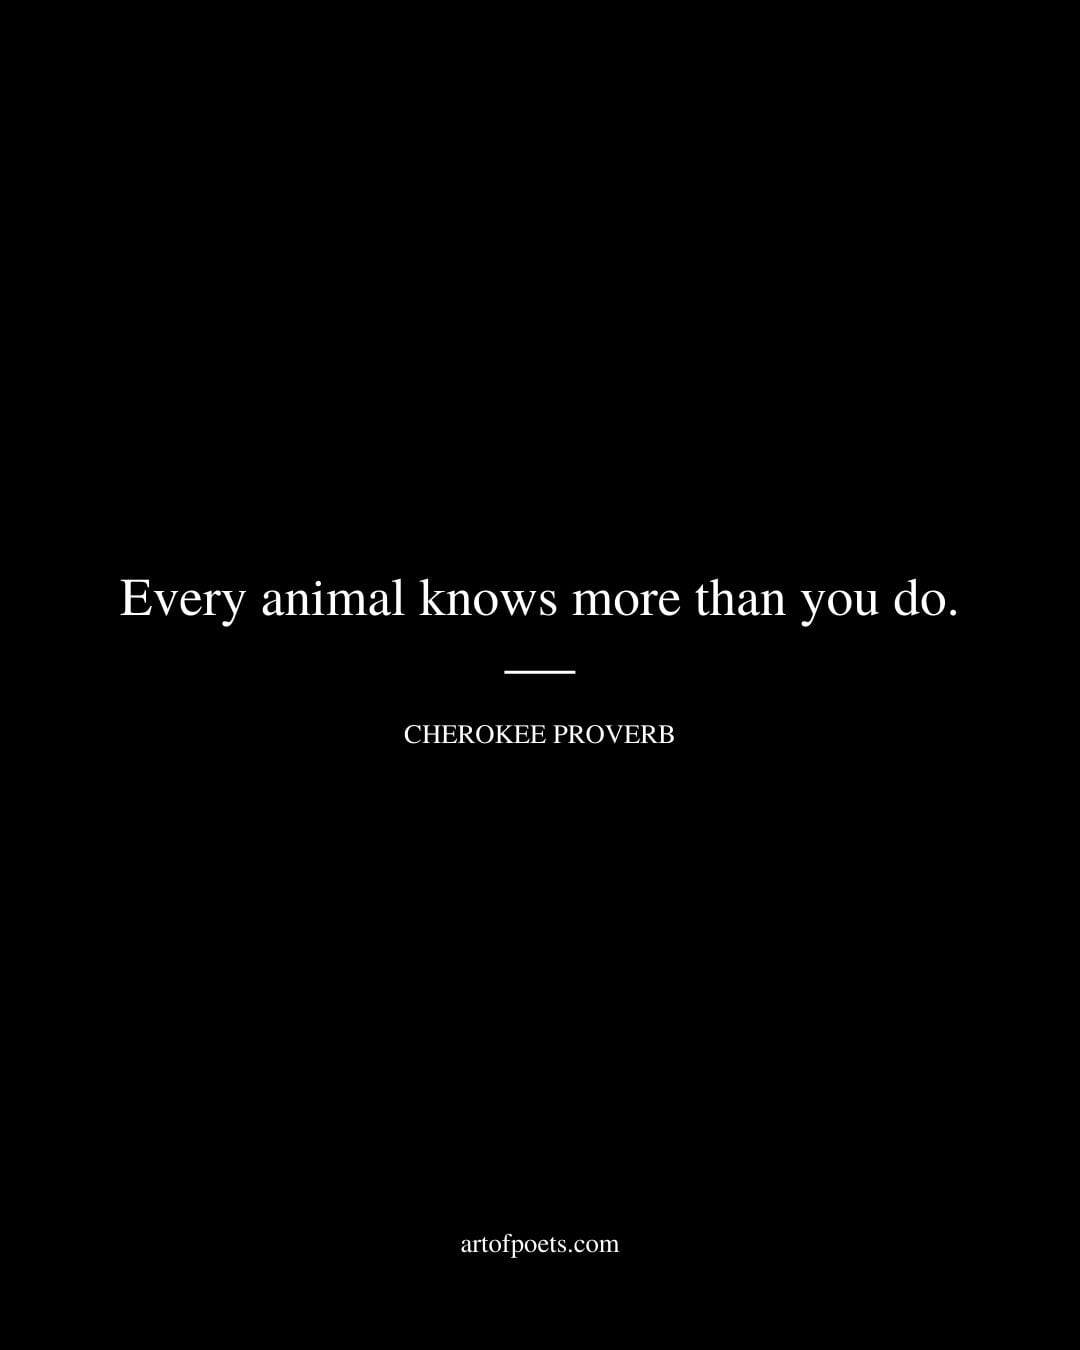 Every animal knows more than you do